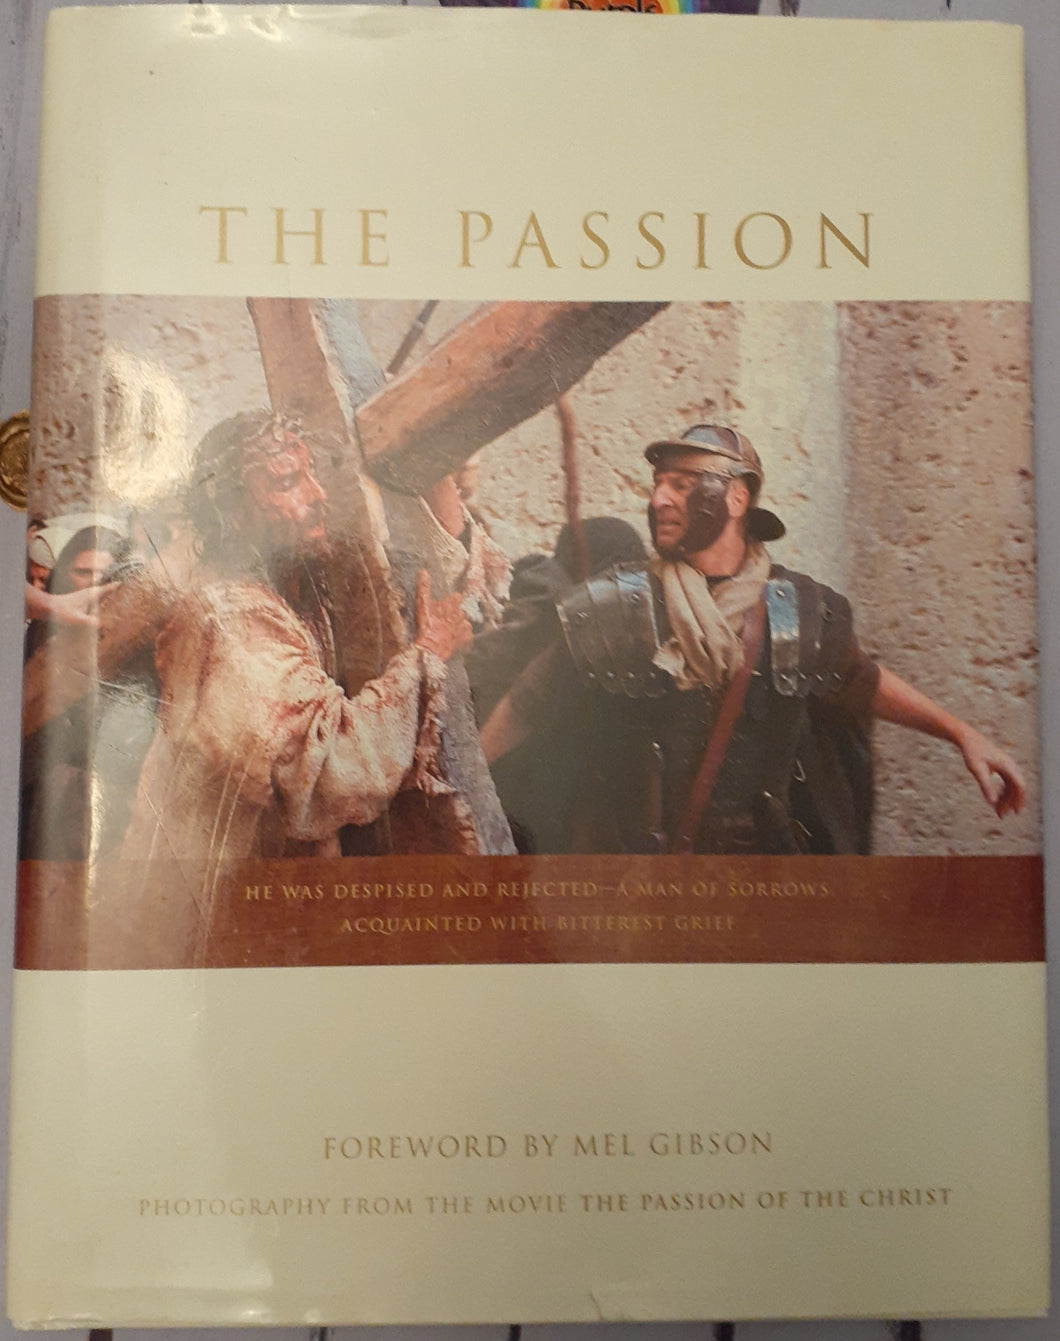 The Passion: Photography from the Movie The Passion of the Christ